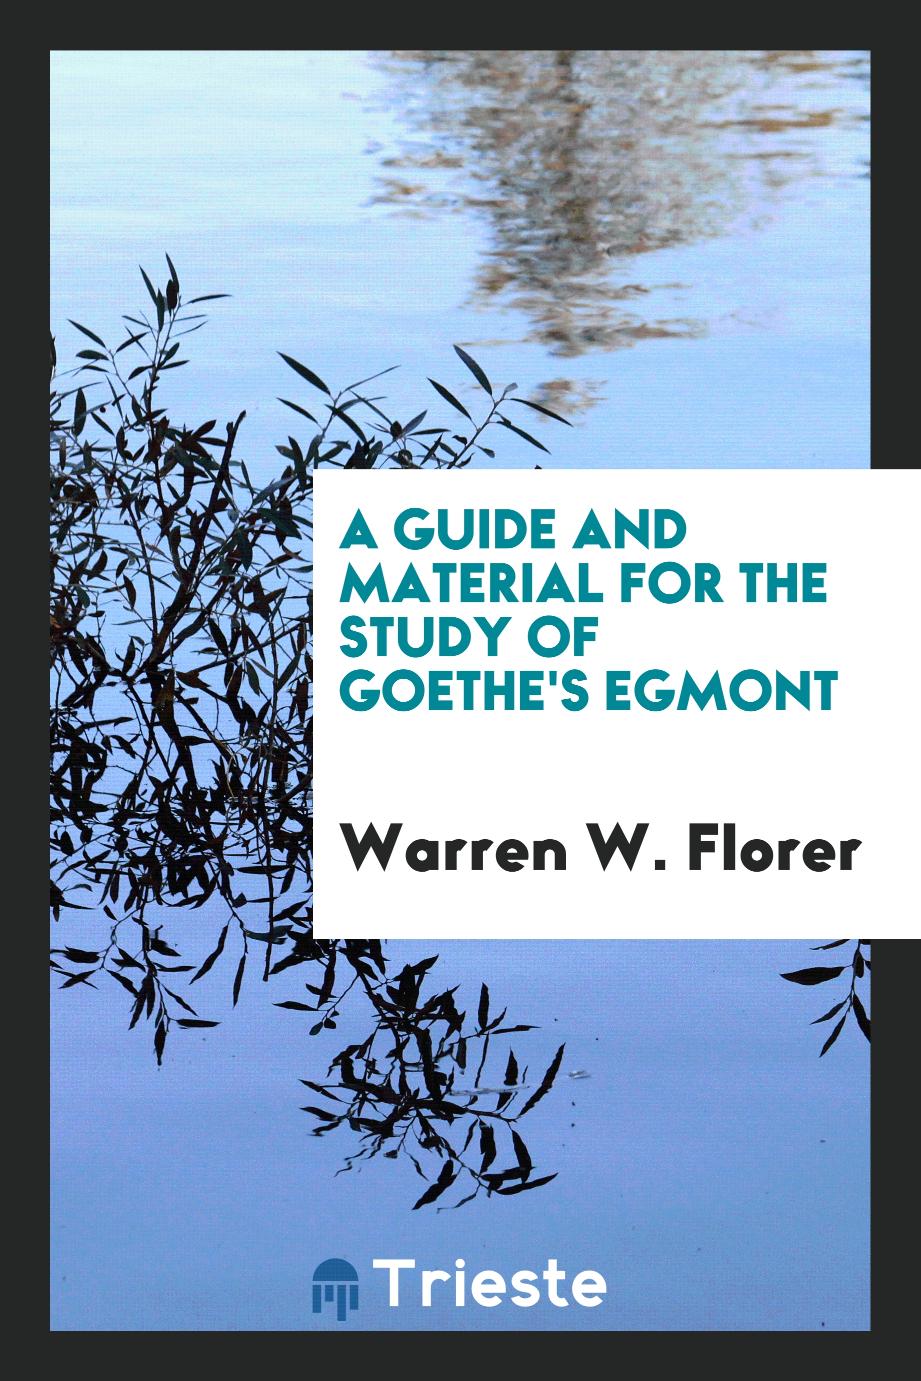 A Guide and Material for the Study of Goethe's Egmont